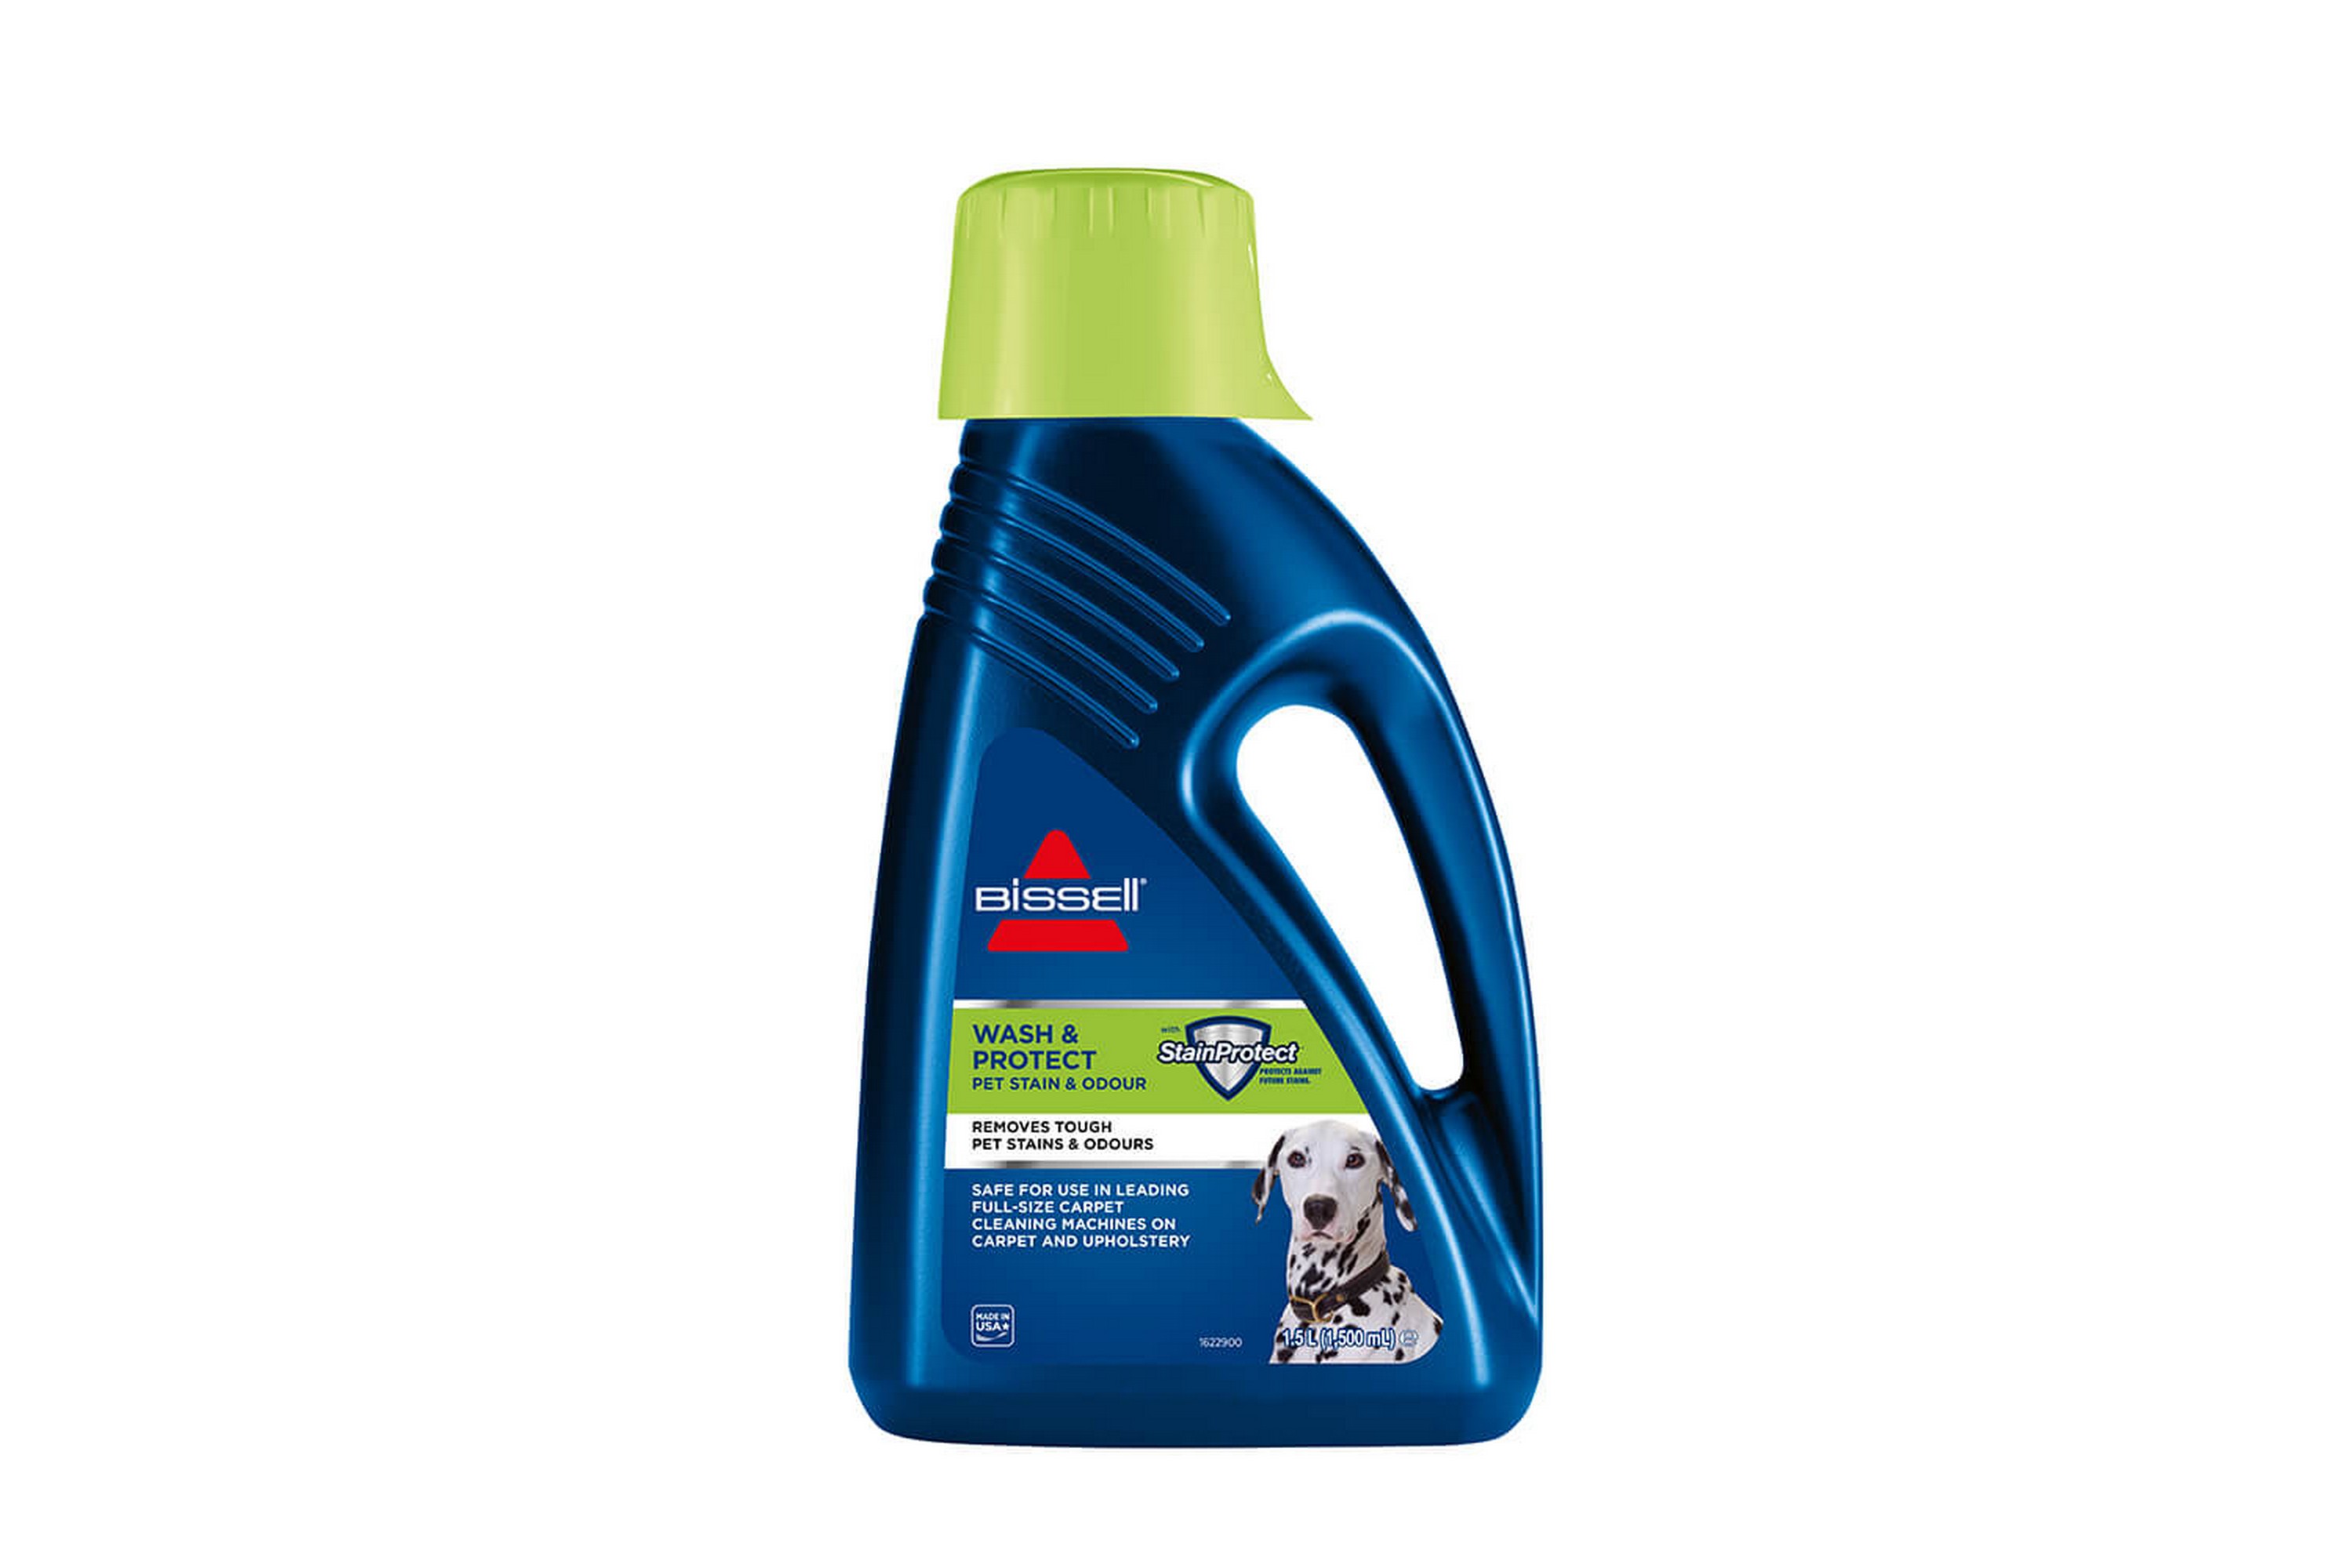 BISSELL Wash & Protect Pet - BISSELL